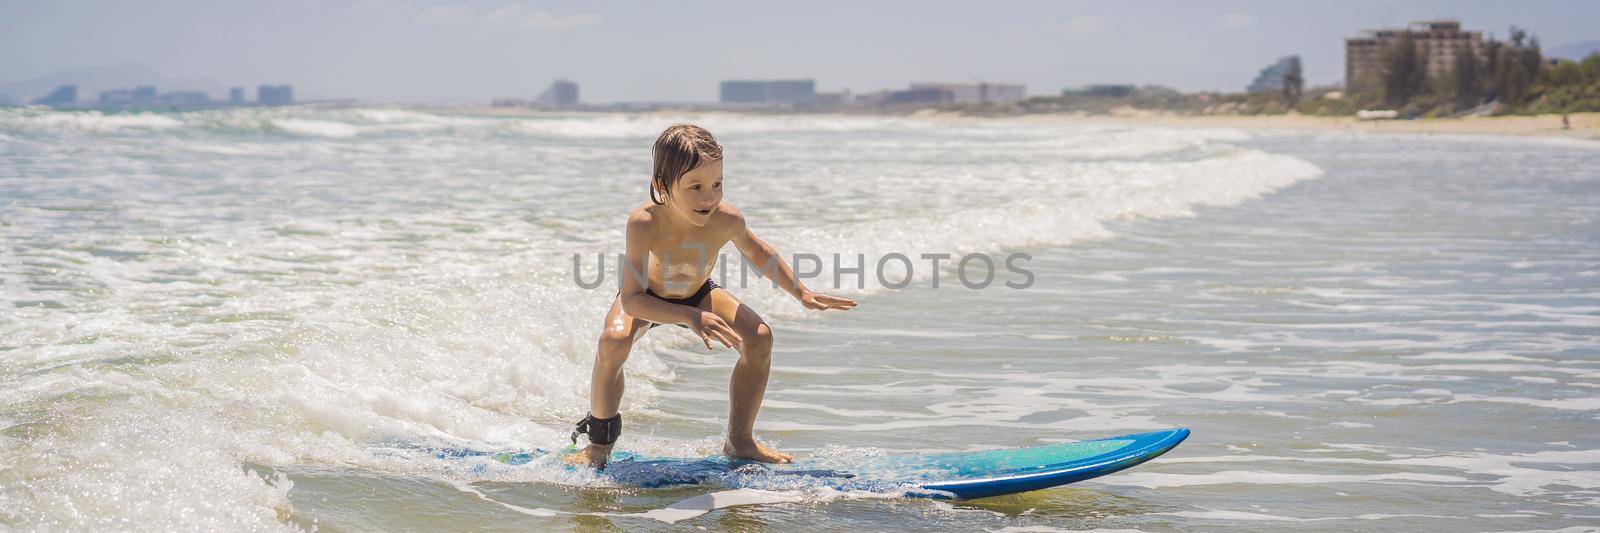 Healthy young boy learning to surf in the sea or ocean. BANNER, LONG FORMAT